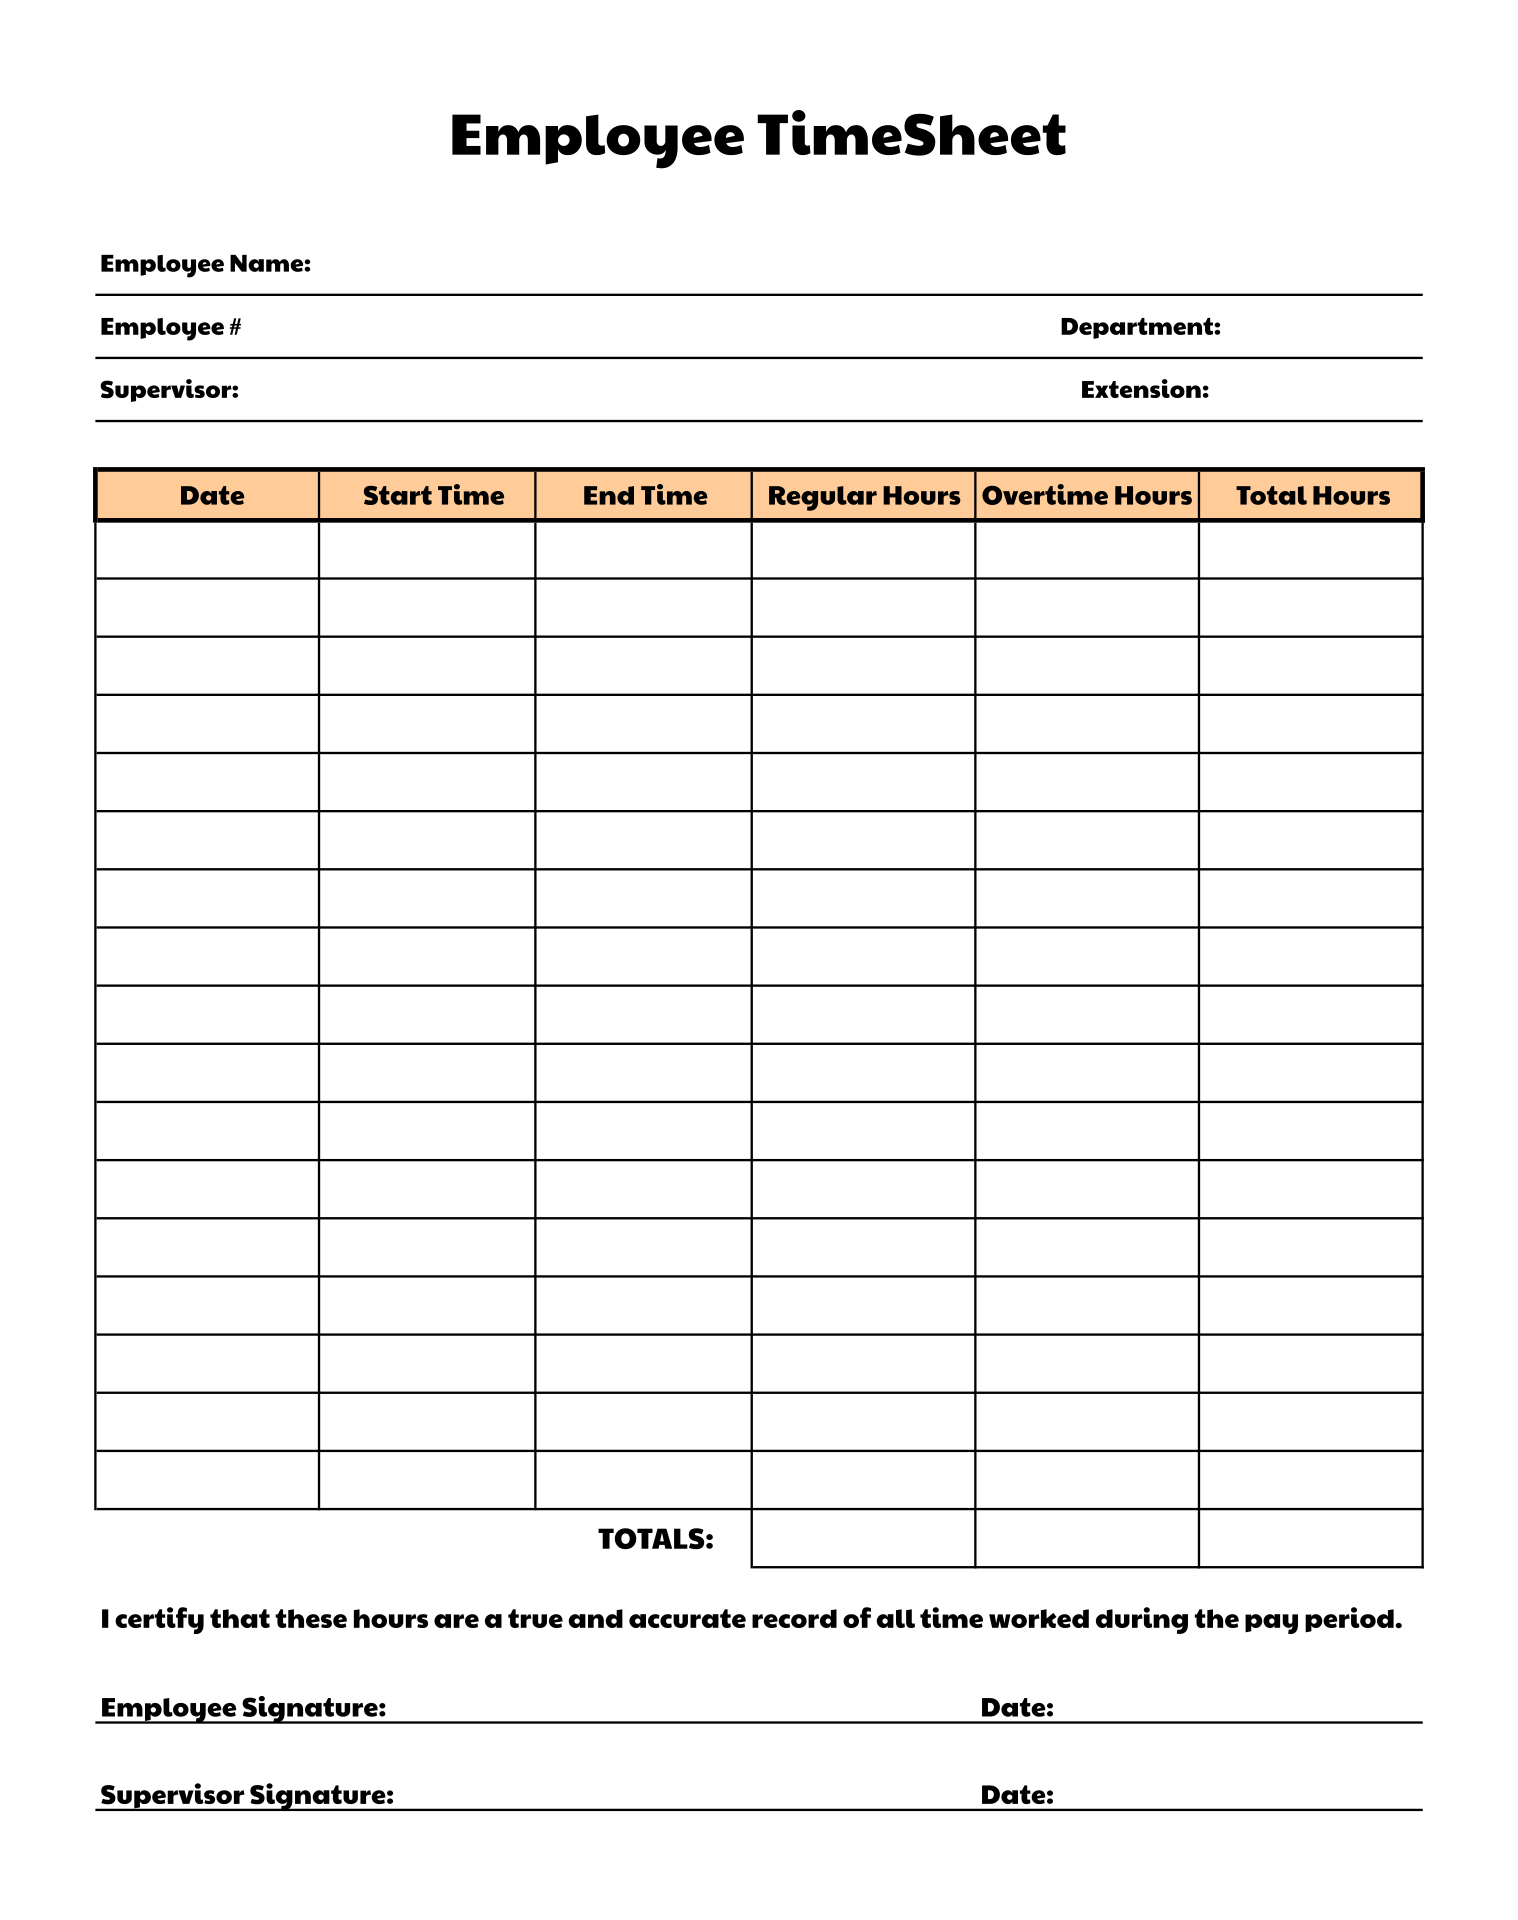 employee-time-sheet-form-printable-printable-forms-free-online